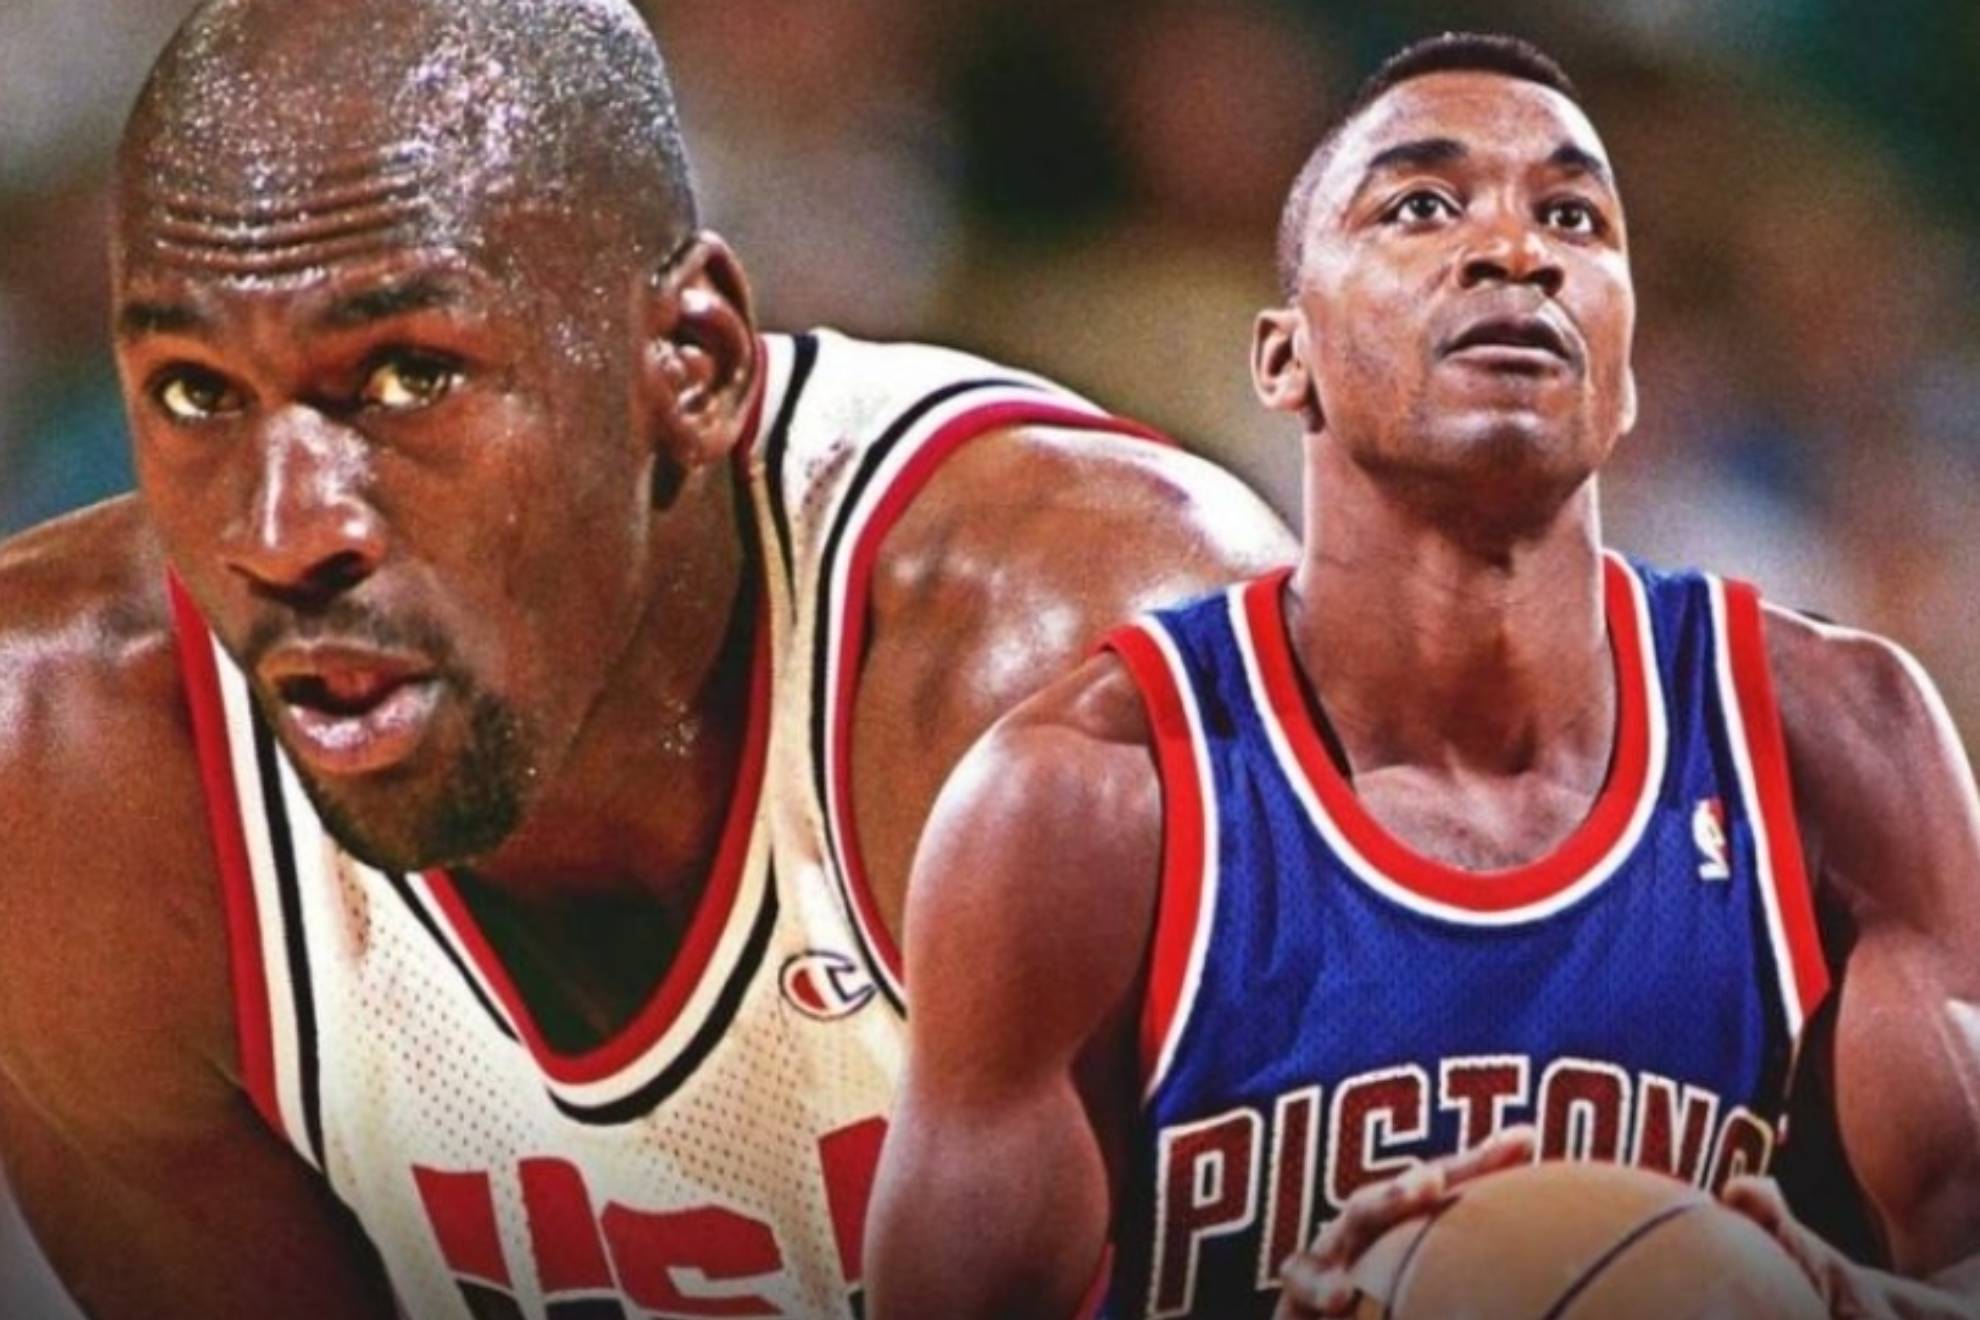 A rivalry revived: Isiah Thomas is still feuding with Michael Jordan